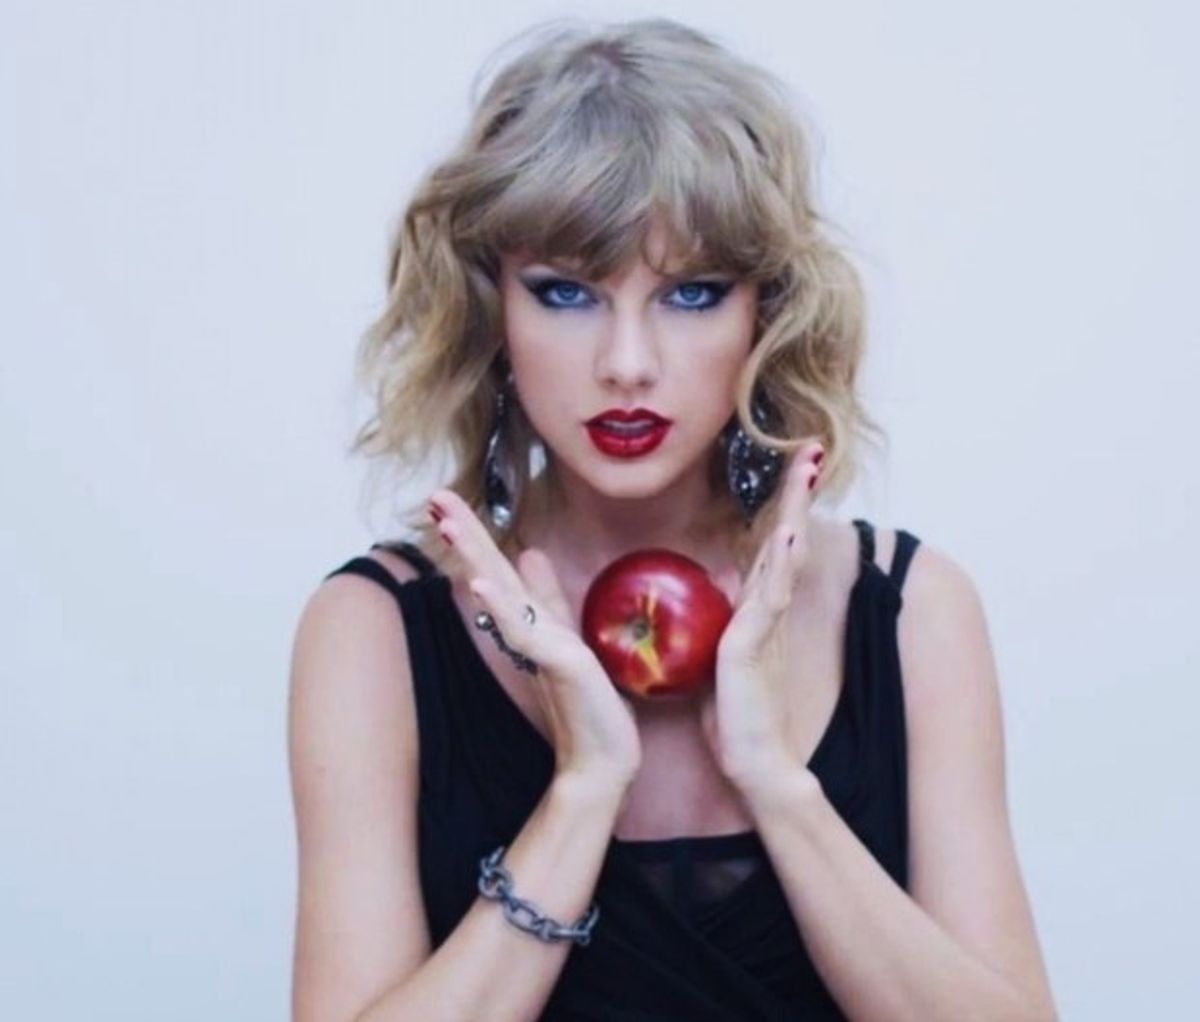 20 Taylor Swift Songs That, Surprise, Aren't About Boys